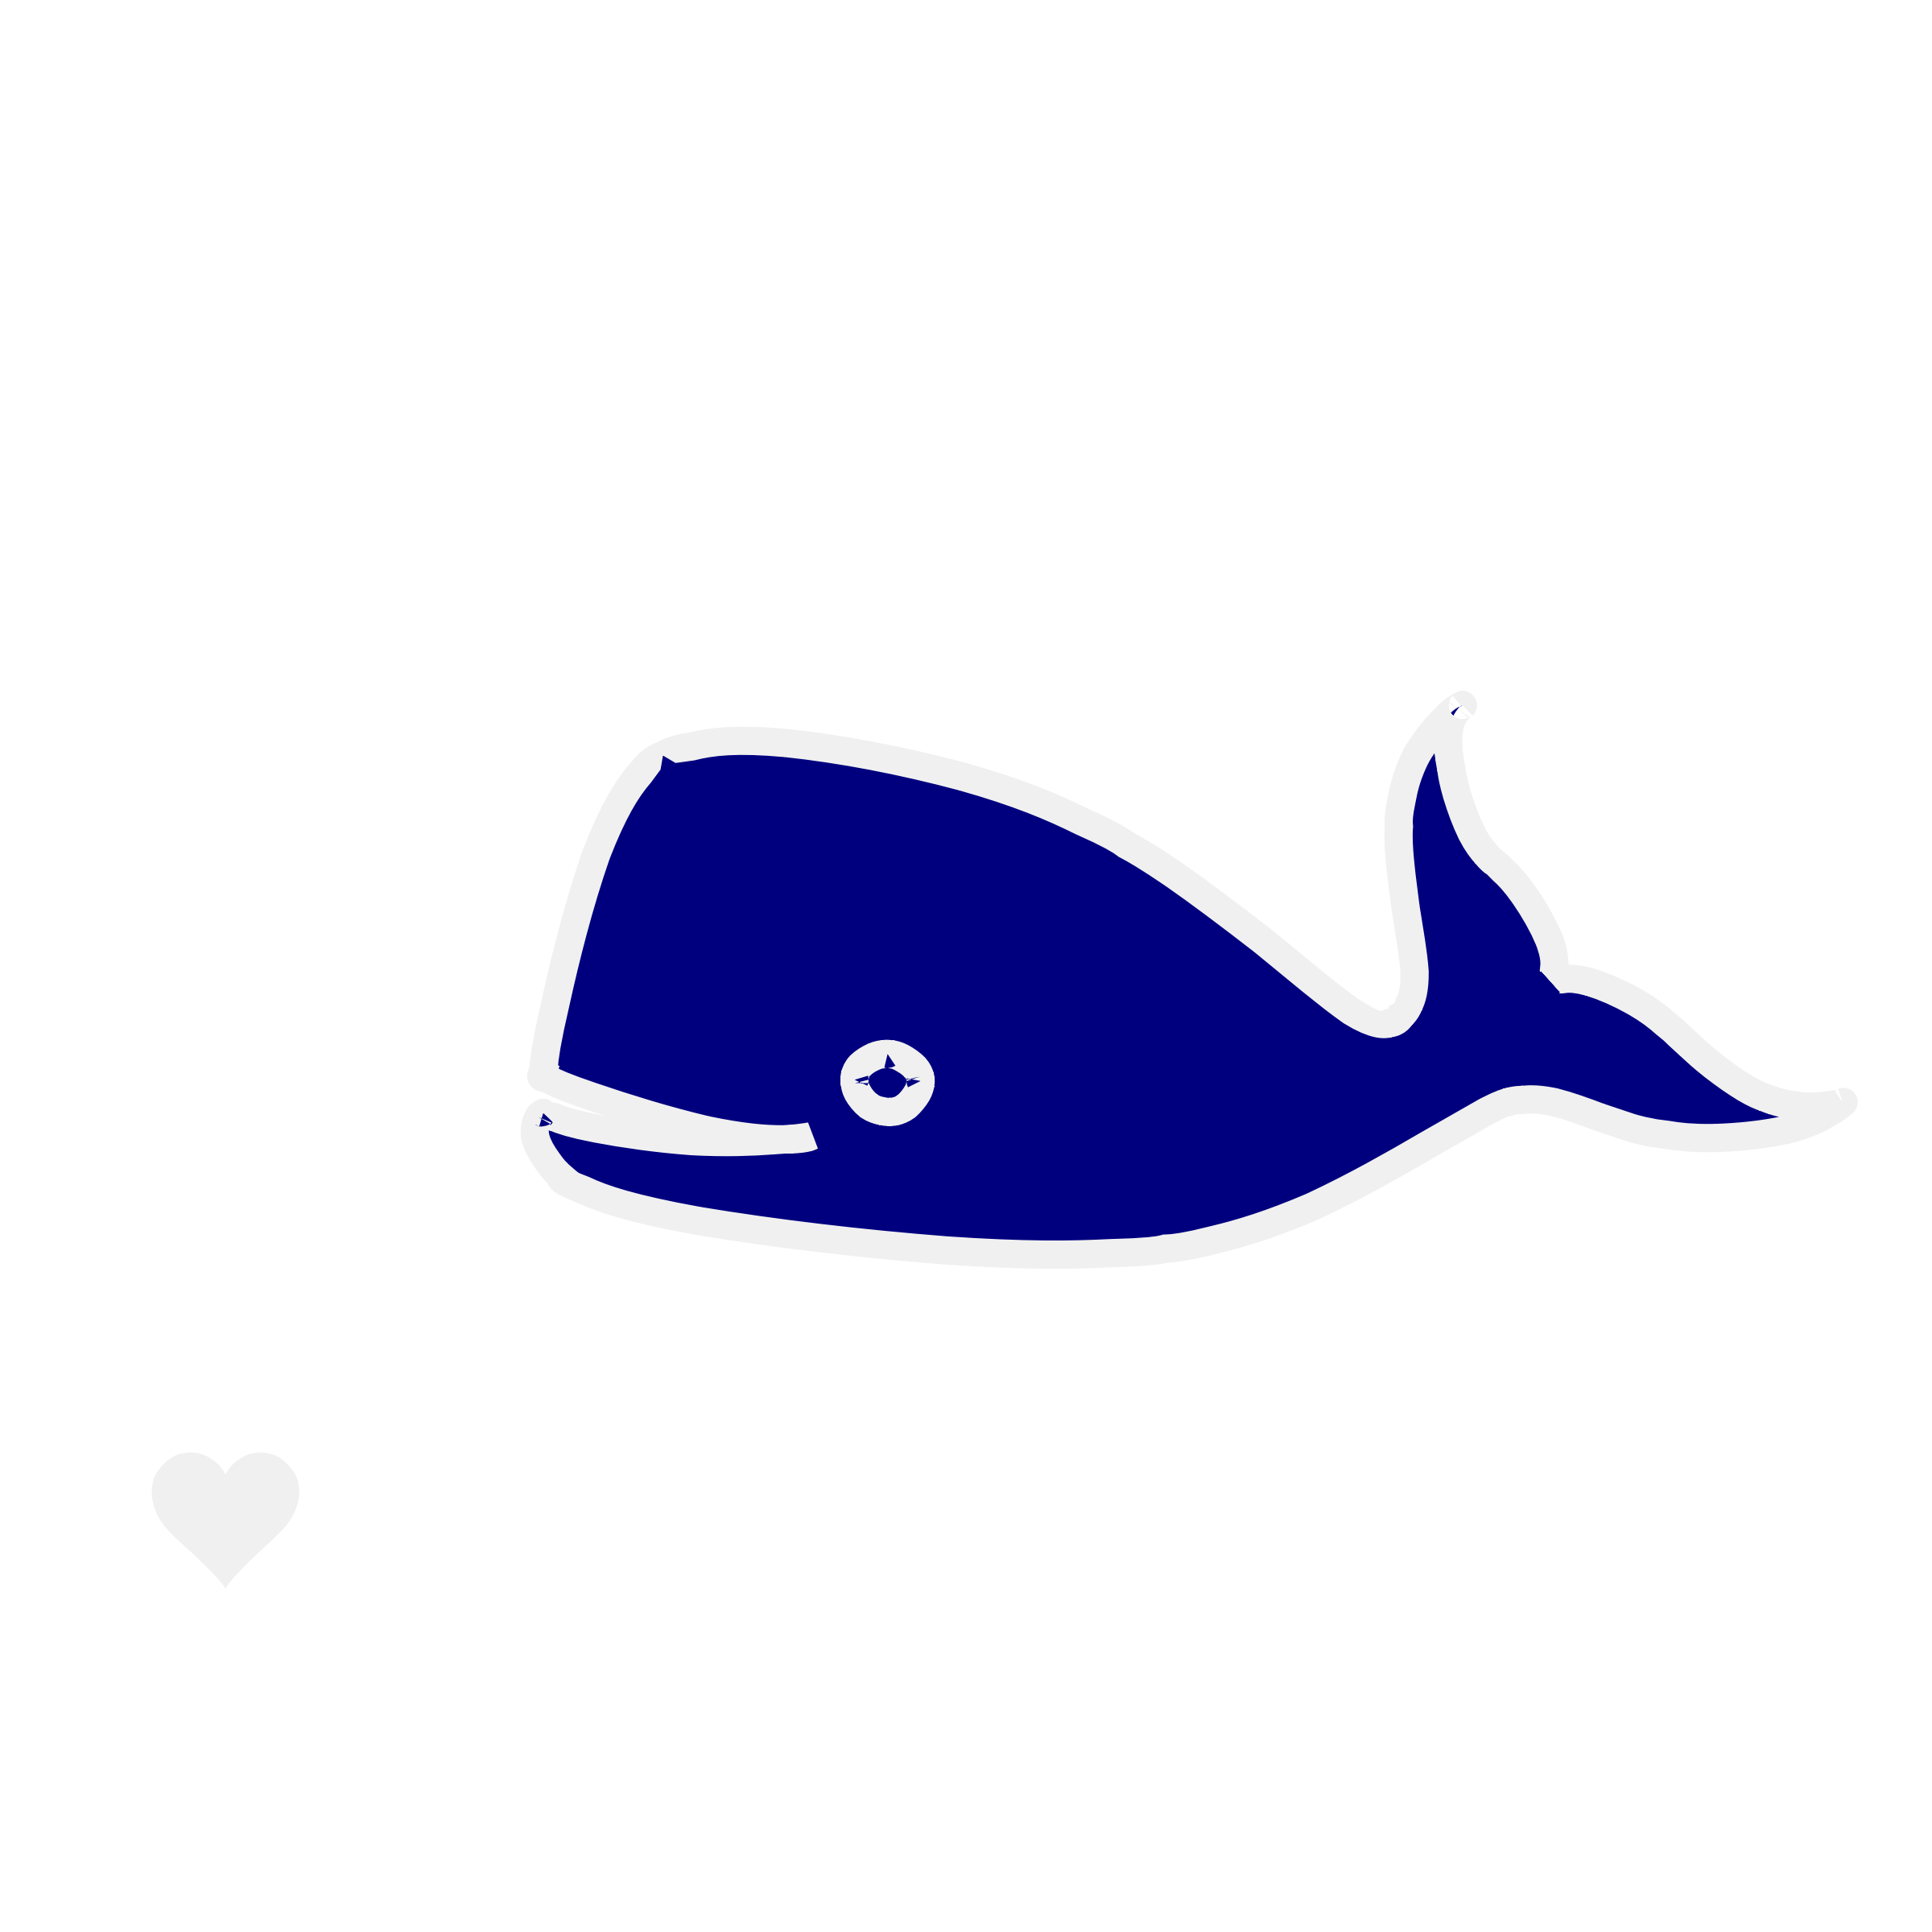 Clipart - Whale (Animation)